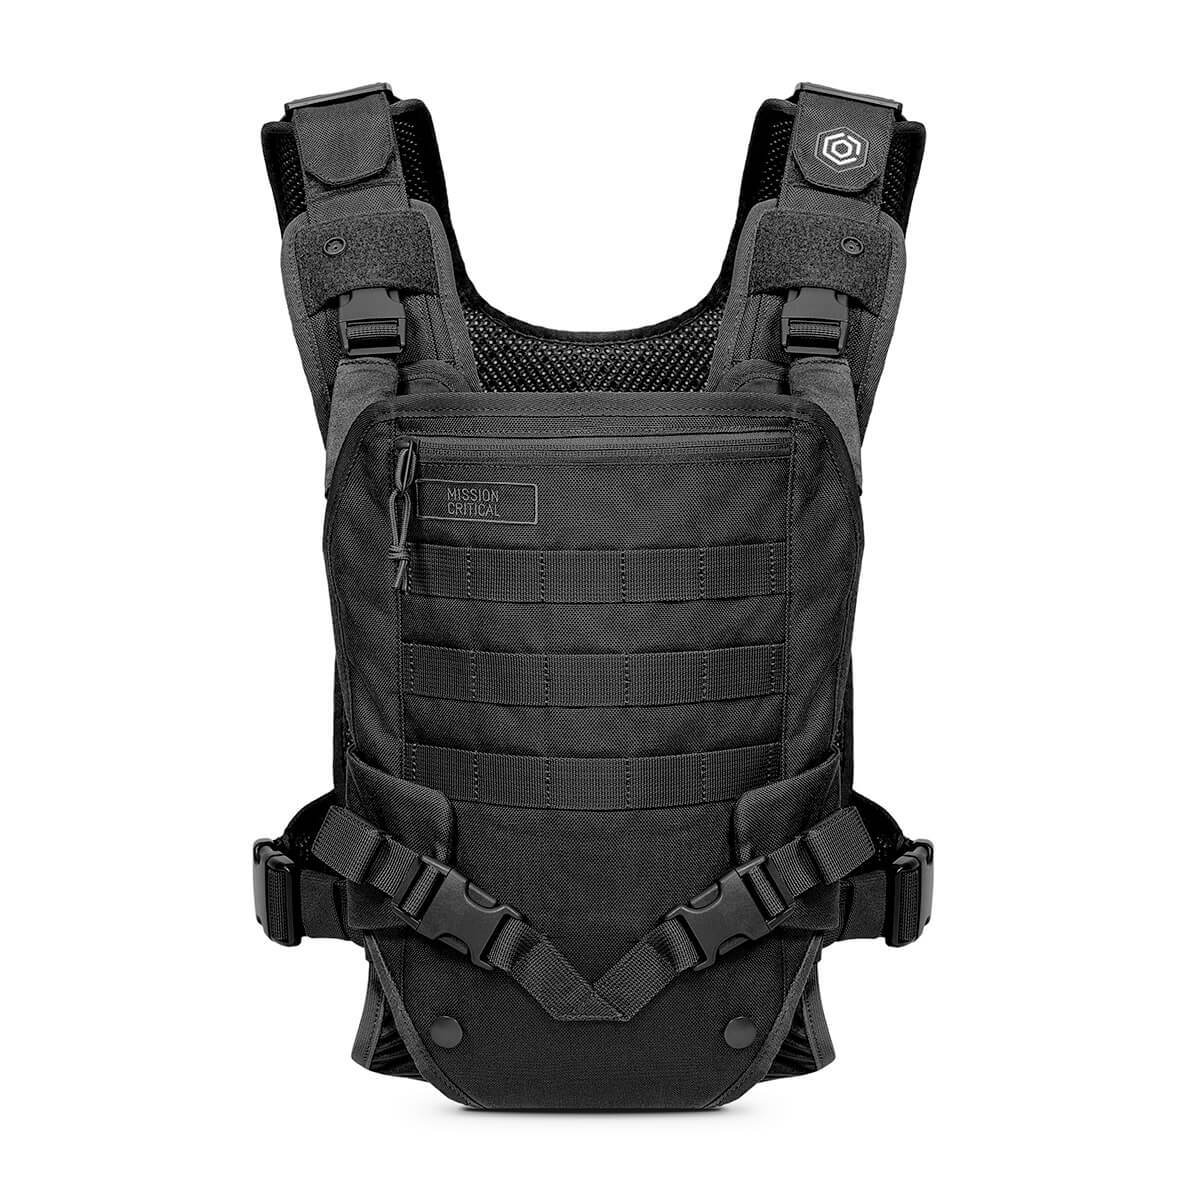 S.01 Action Baby Carrier - Balance Kit